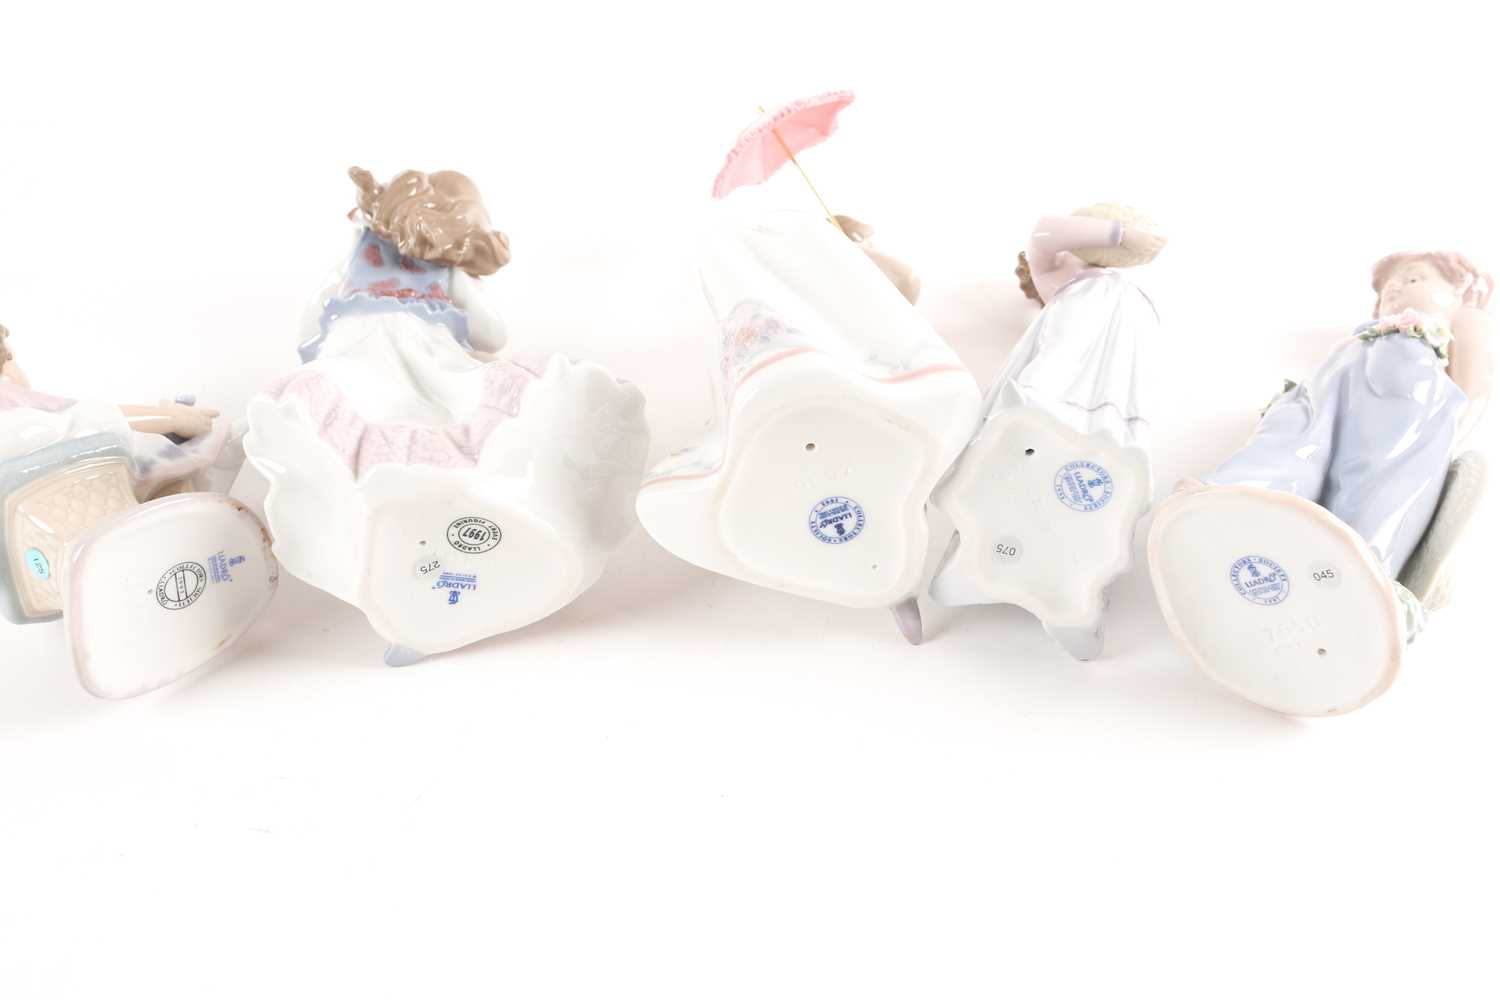 Five Lladro figures, Best Friend (07620), Pocket Full of Wishes (07650), Innocence in Bloom (07644), - Image 7 of 10